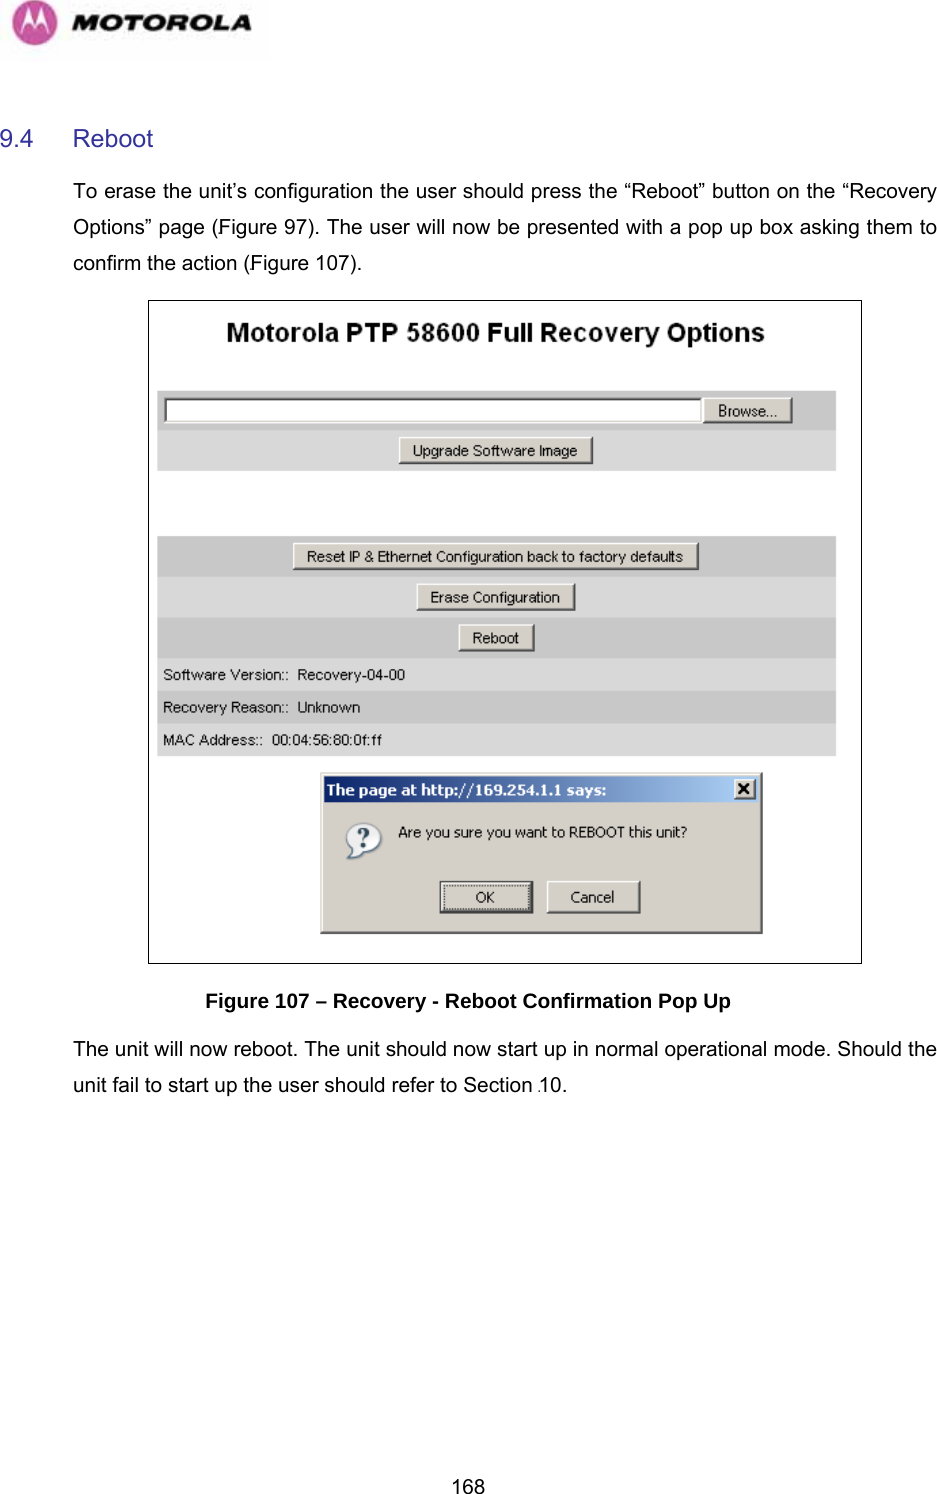   1689.4 Reboot To erase the unit’s configuration the user should press the “Reboot” button on the “Recovery Options” page (1174HFigure 97). The user will now be presented with a pop up box asking them to confirm the action (1175HFigure 107).  Figure 107 – Recovery - Reboot Confirmation Pop Up The unit will now reboot. The unit should now start up in normal operational mode. Should the unit fail to start up the user should refer to Section 1176H10. 